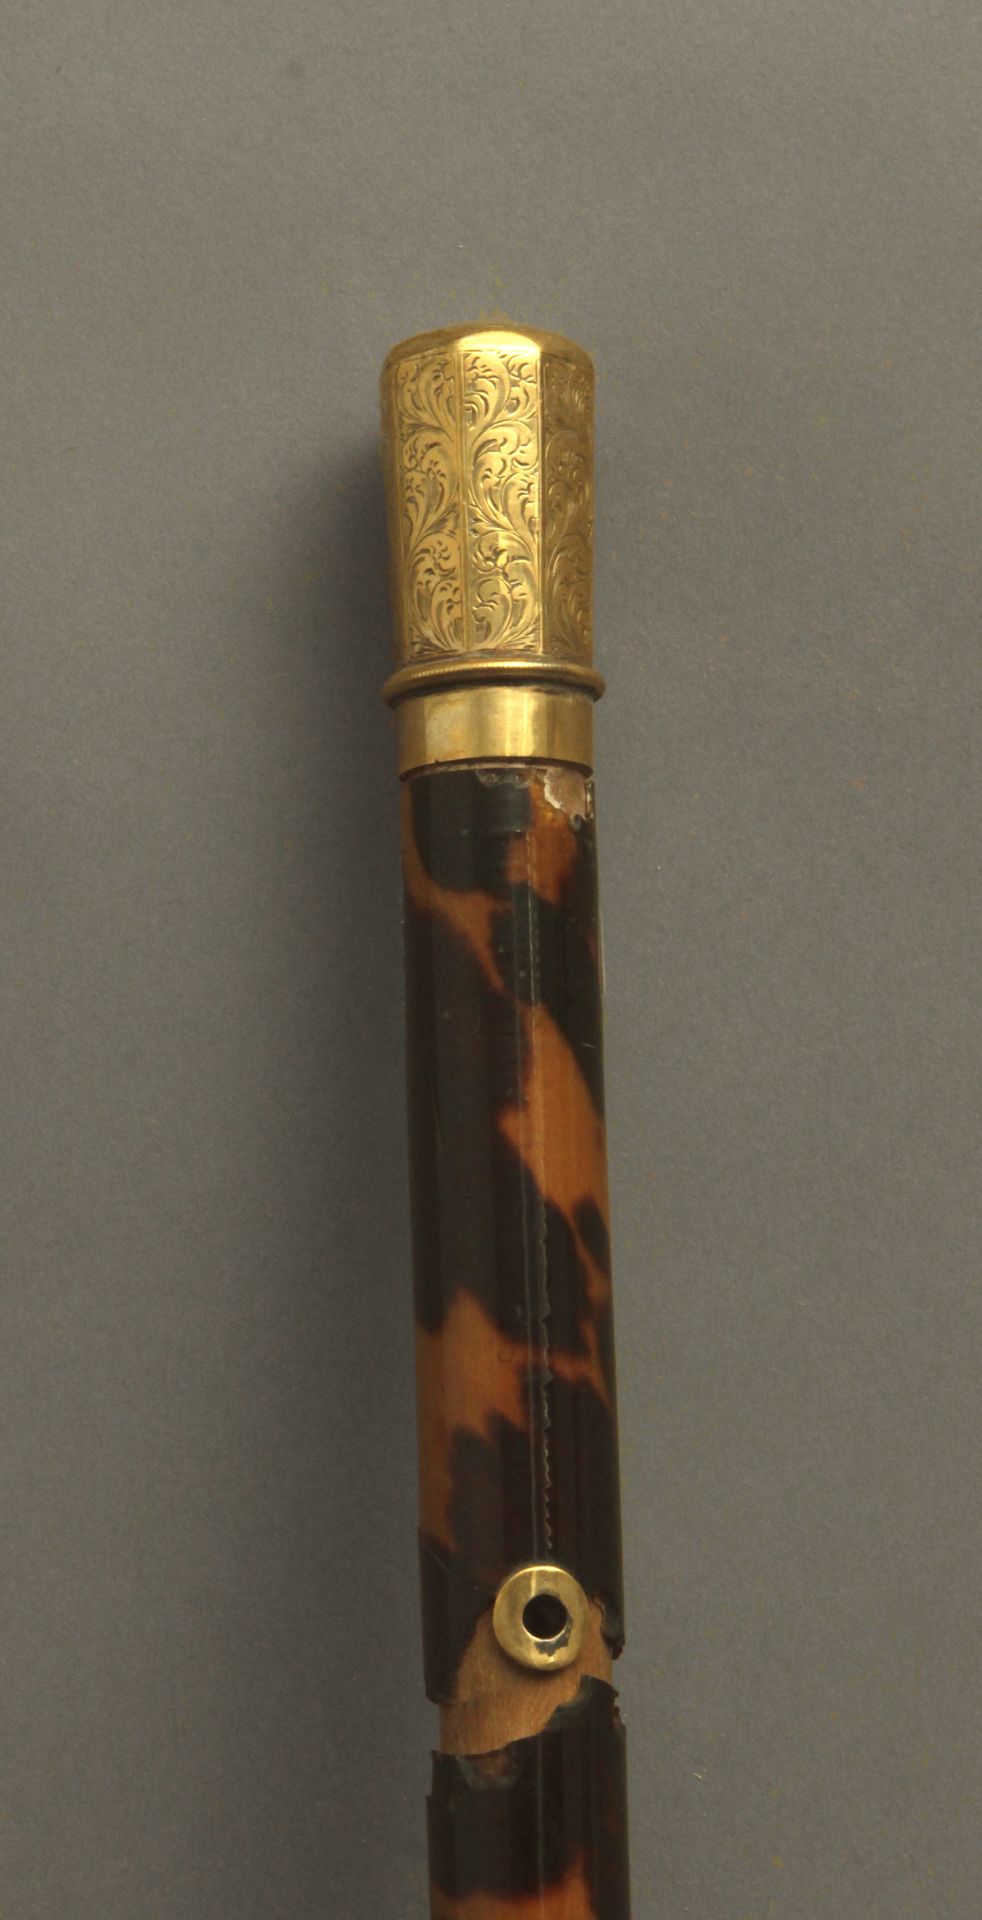 A first third of 20th century baton with a 14k. yellow gold handle and a tortoiseshell shaft